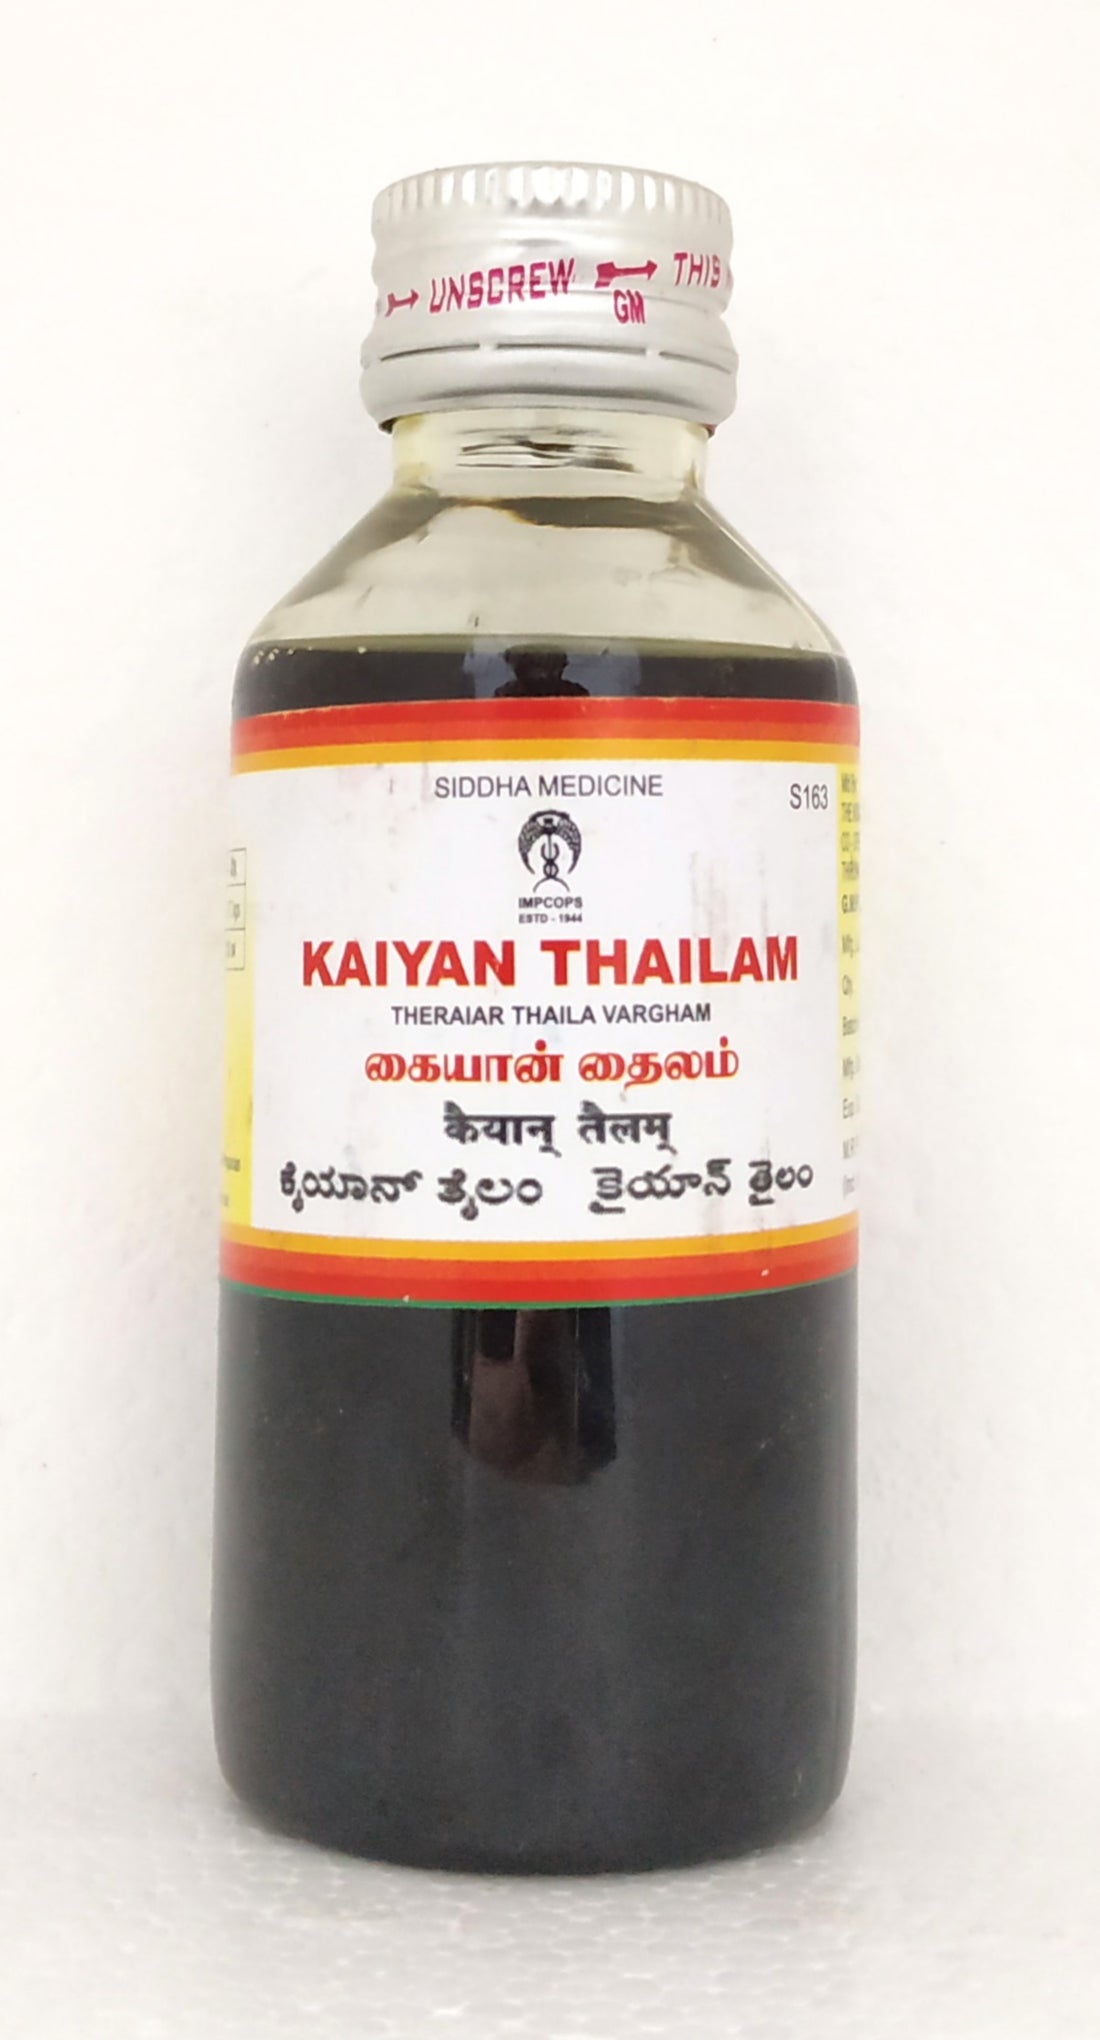 Shop Kaiyan thailam 100ml at price 110.00 from Impcops Online - Ayush Care